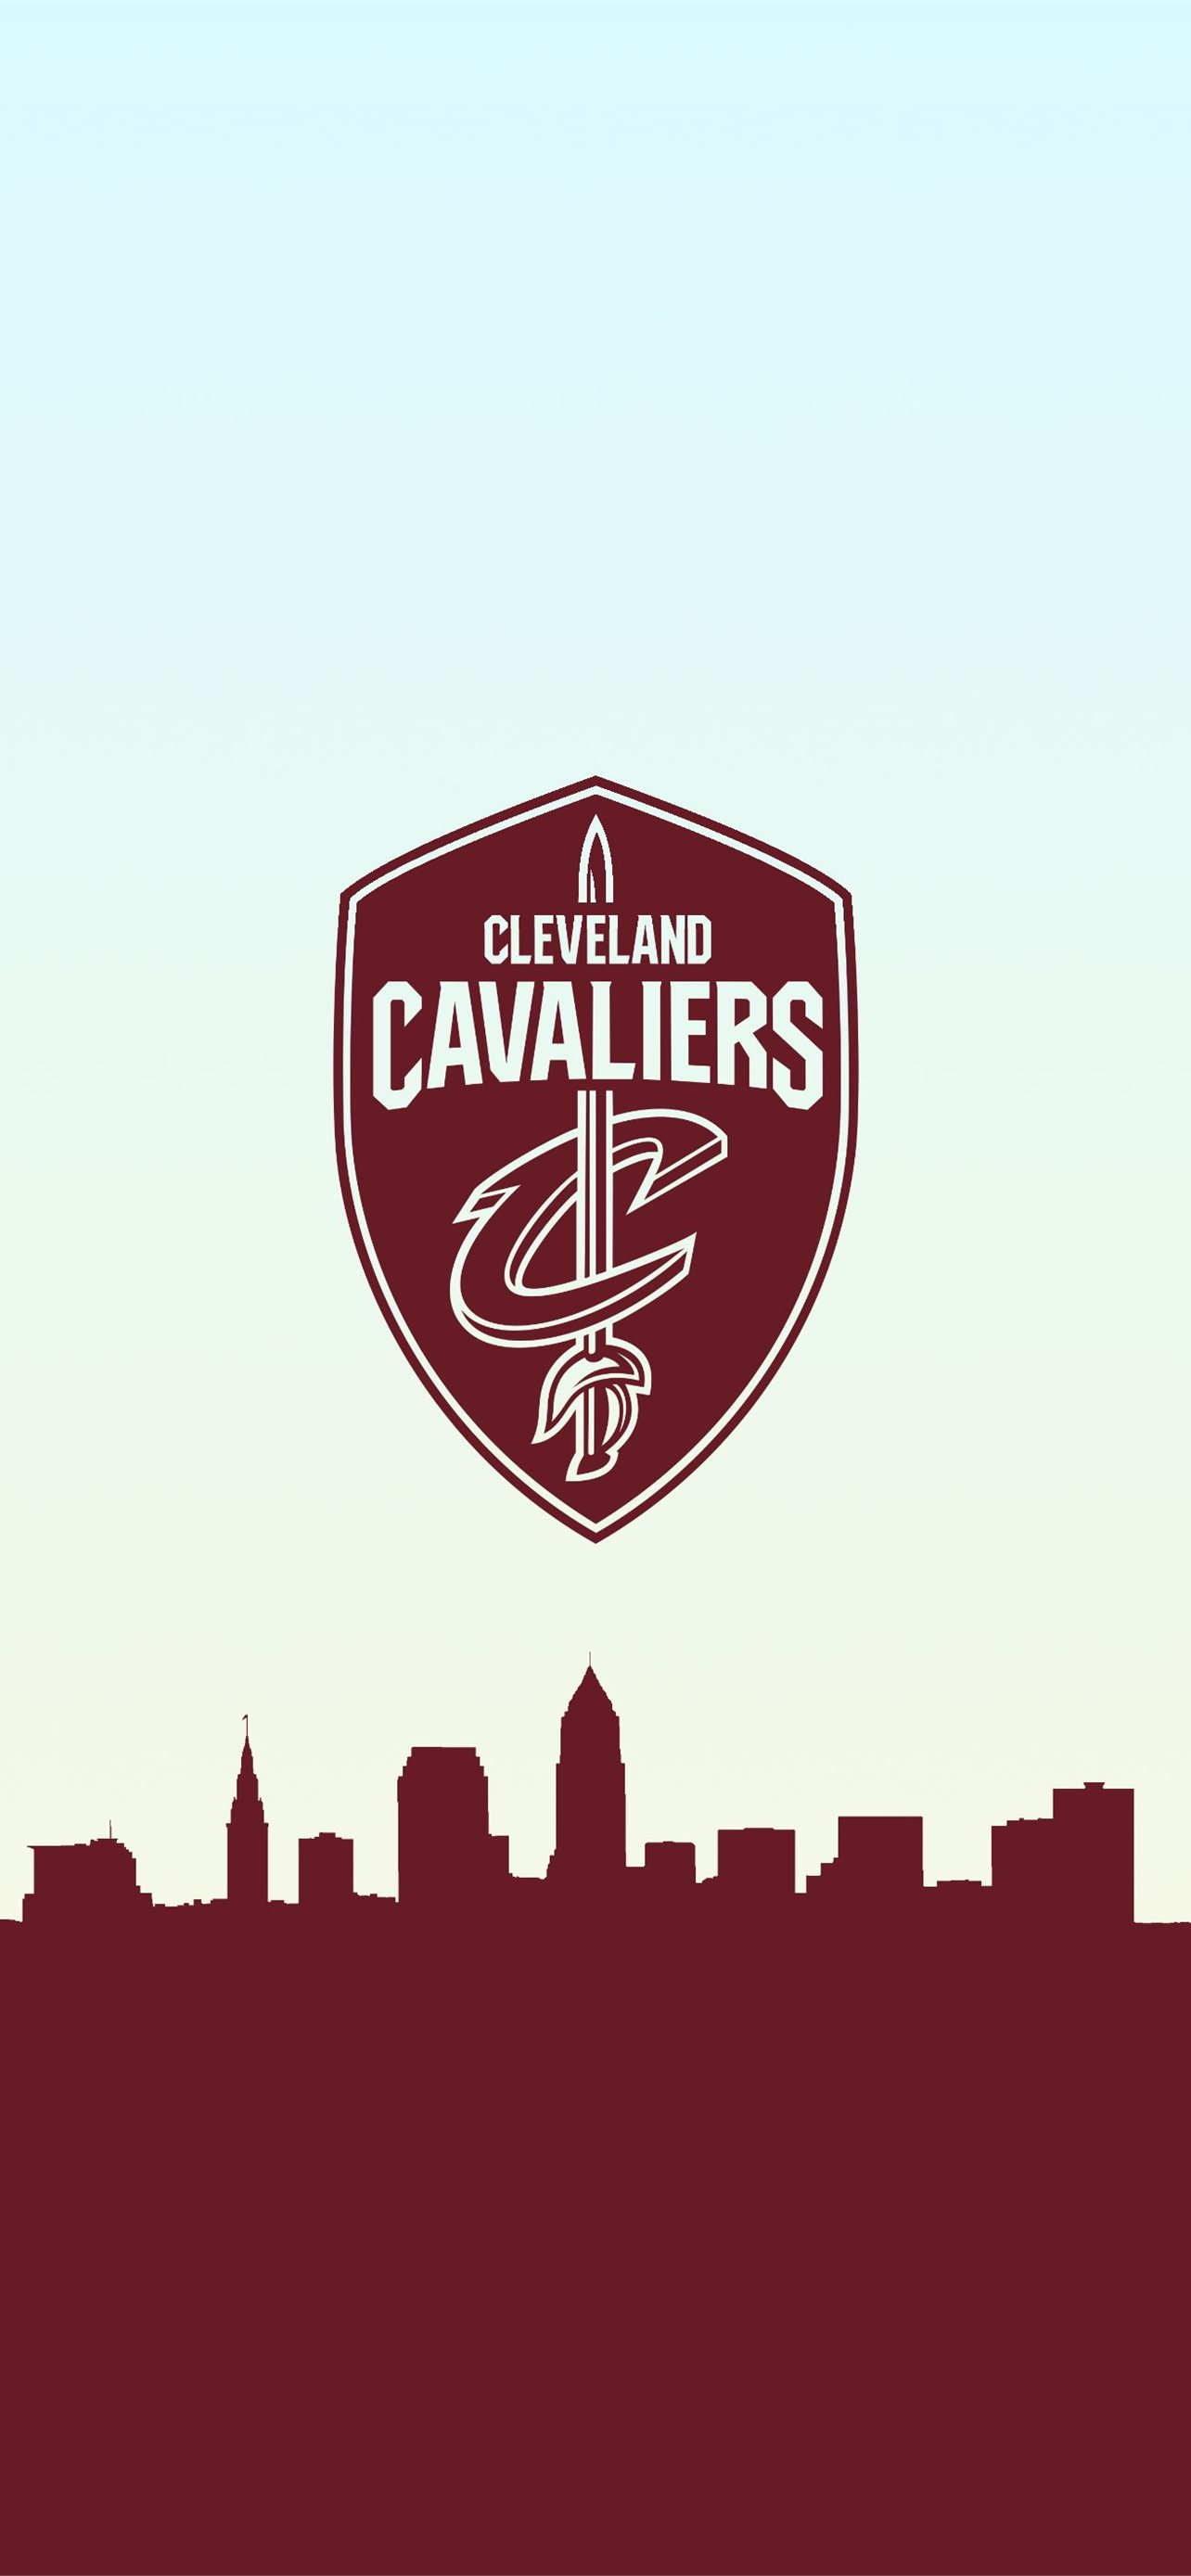 Download wallpapers Cleveland Cavaliers flag 4k purple and yellow 3D  waves NBA american basketball team Cleveland Cavaliers logo CAVS logo  basketball Cleveland Cavaliers CAVS for desktop free Pictures for  desktop free